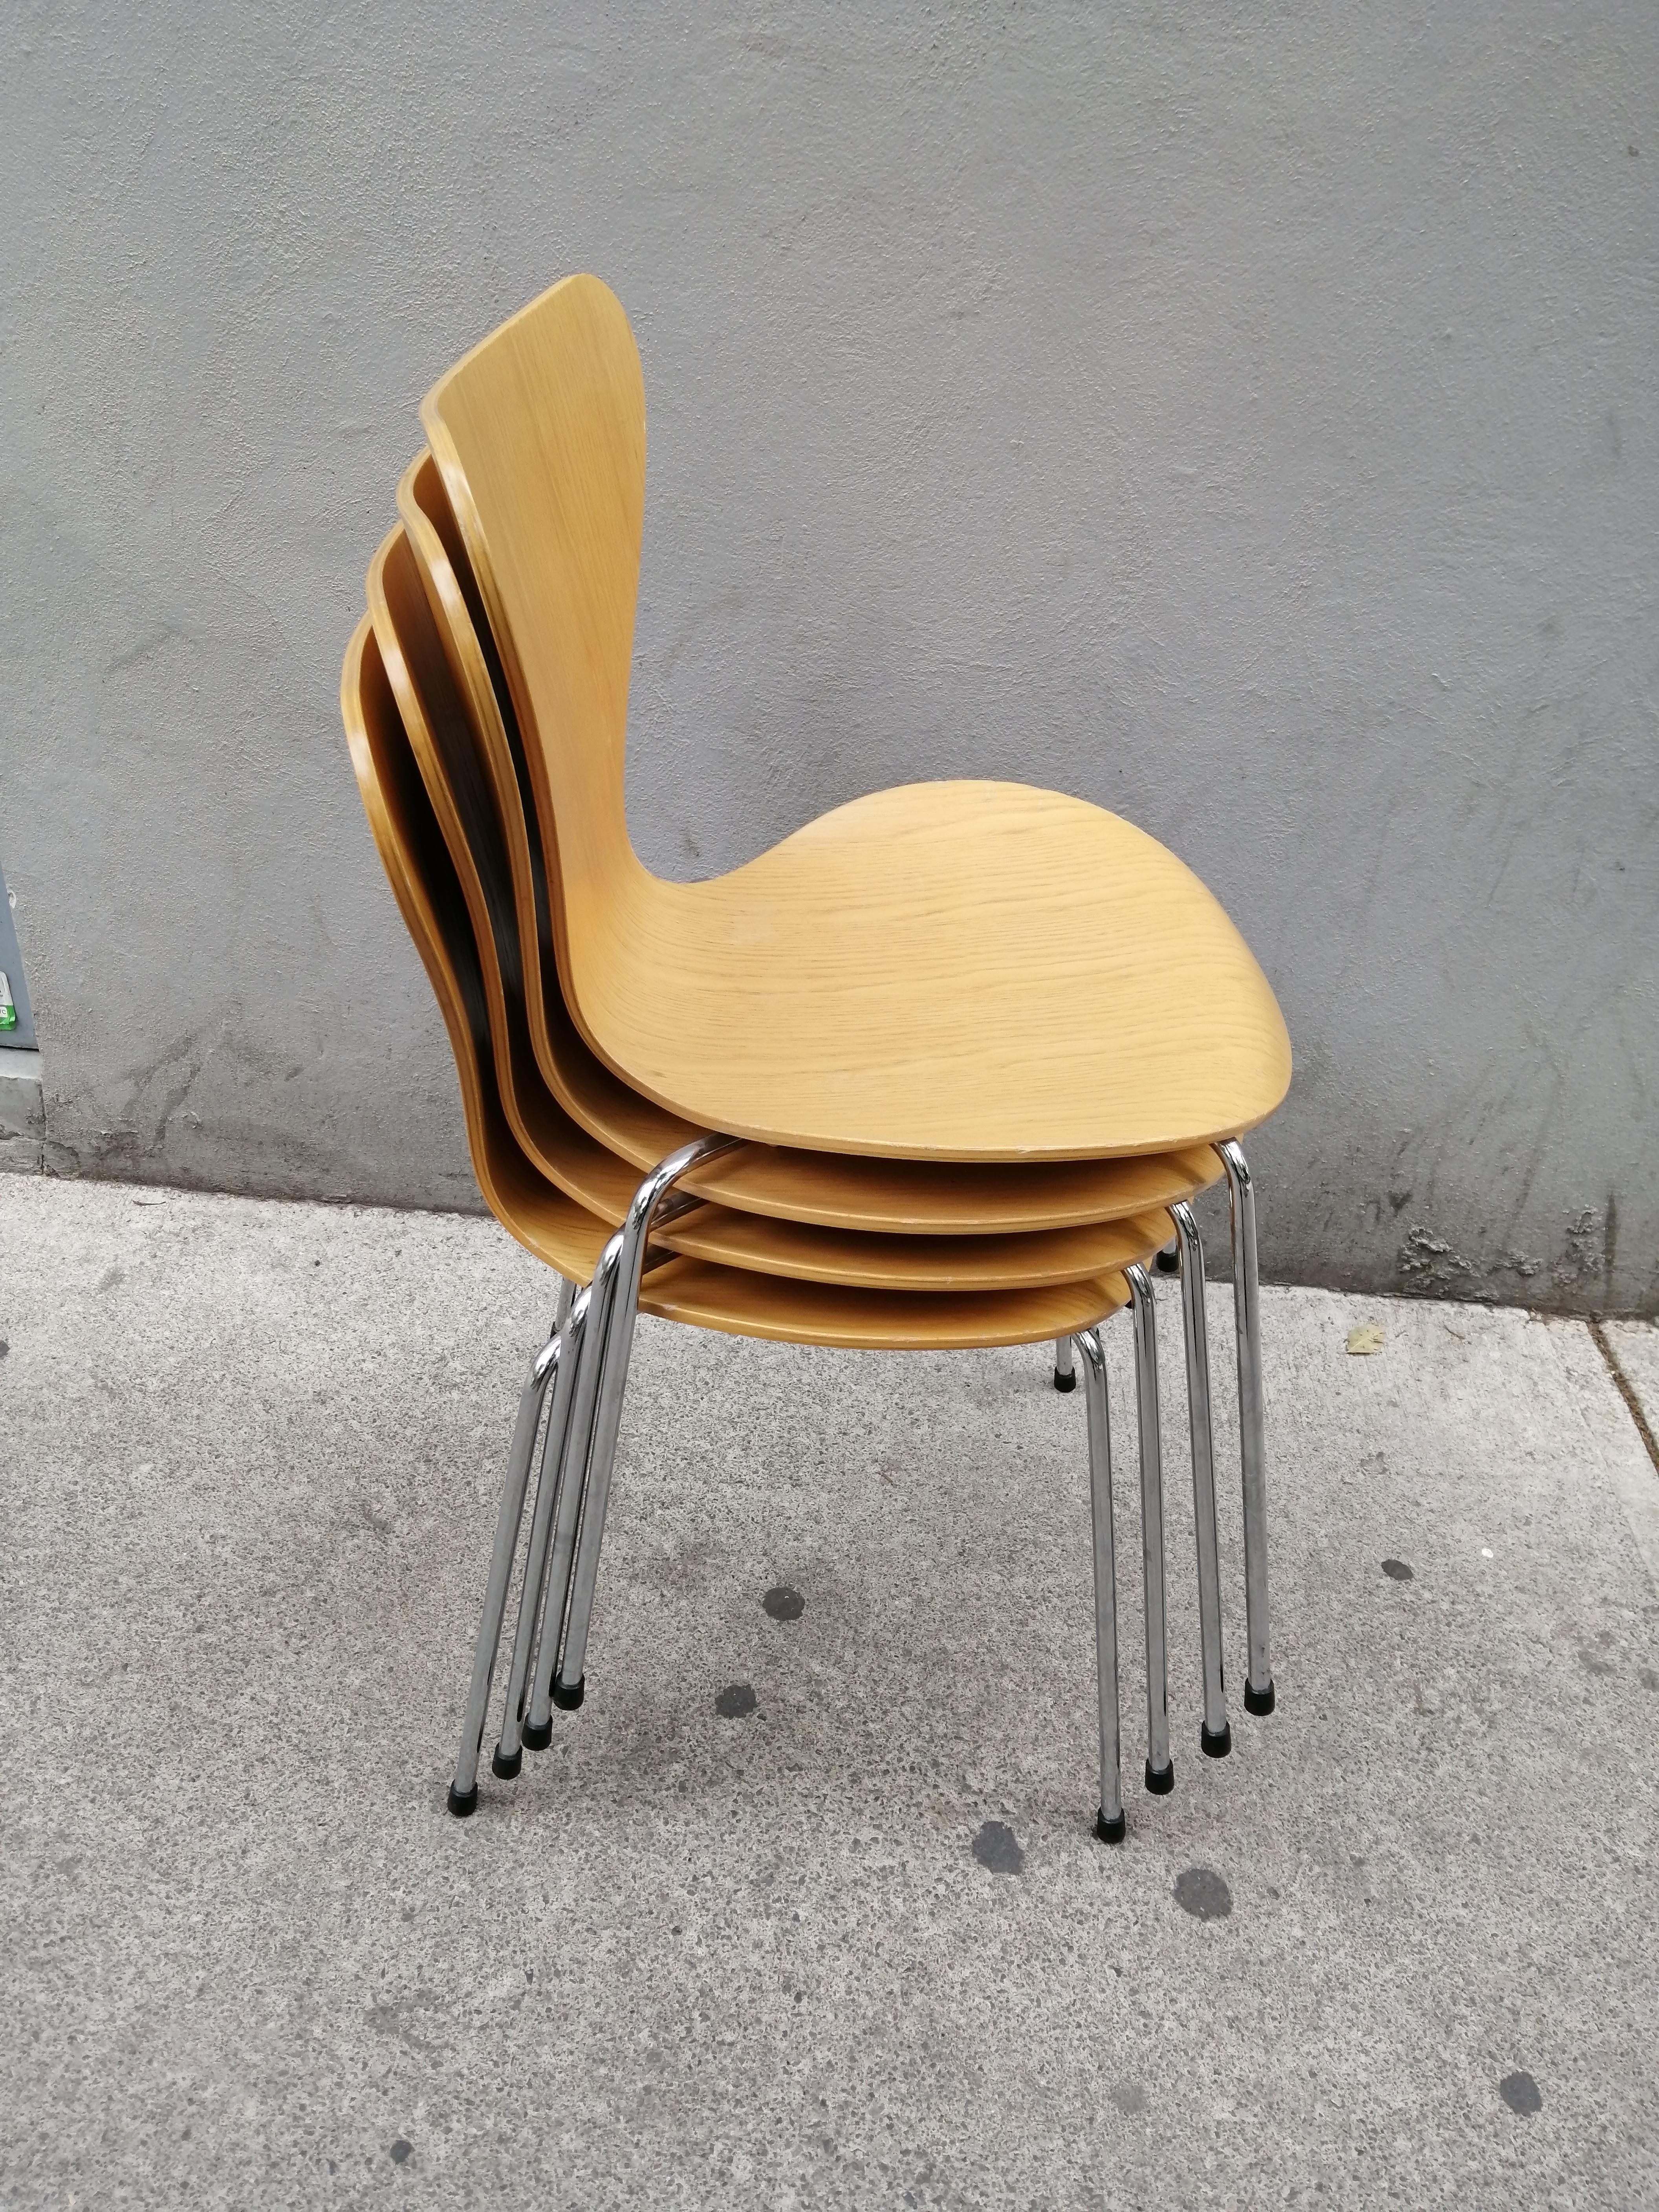 Arne Jacobsen Set of 4 Model 3107 Chairs For Sale 1